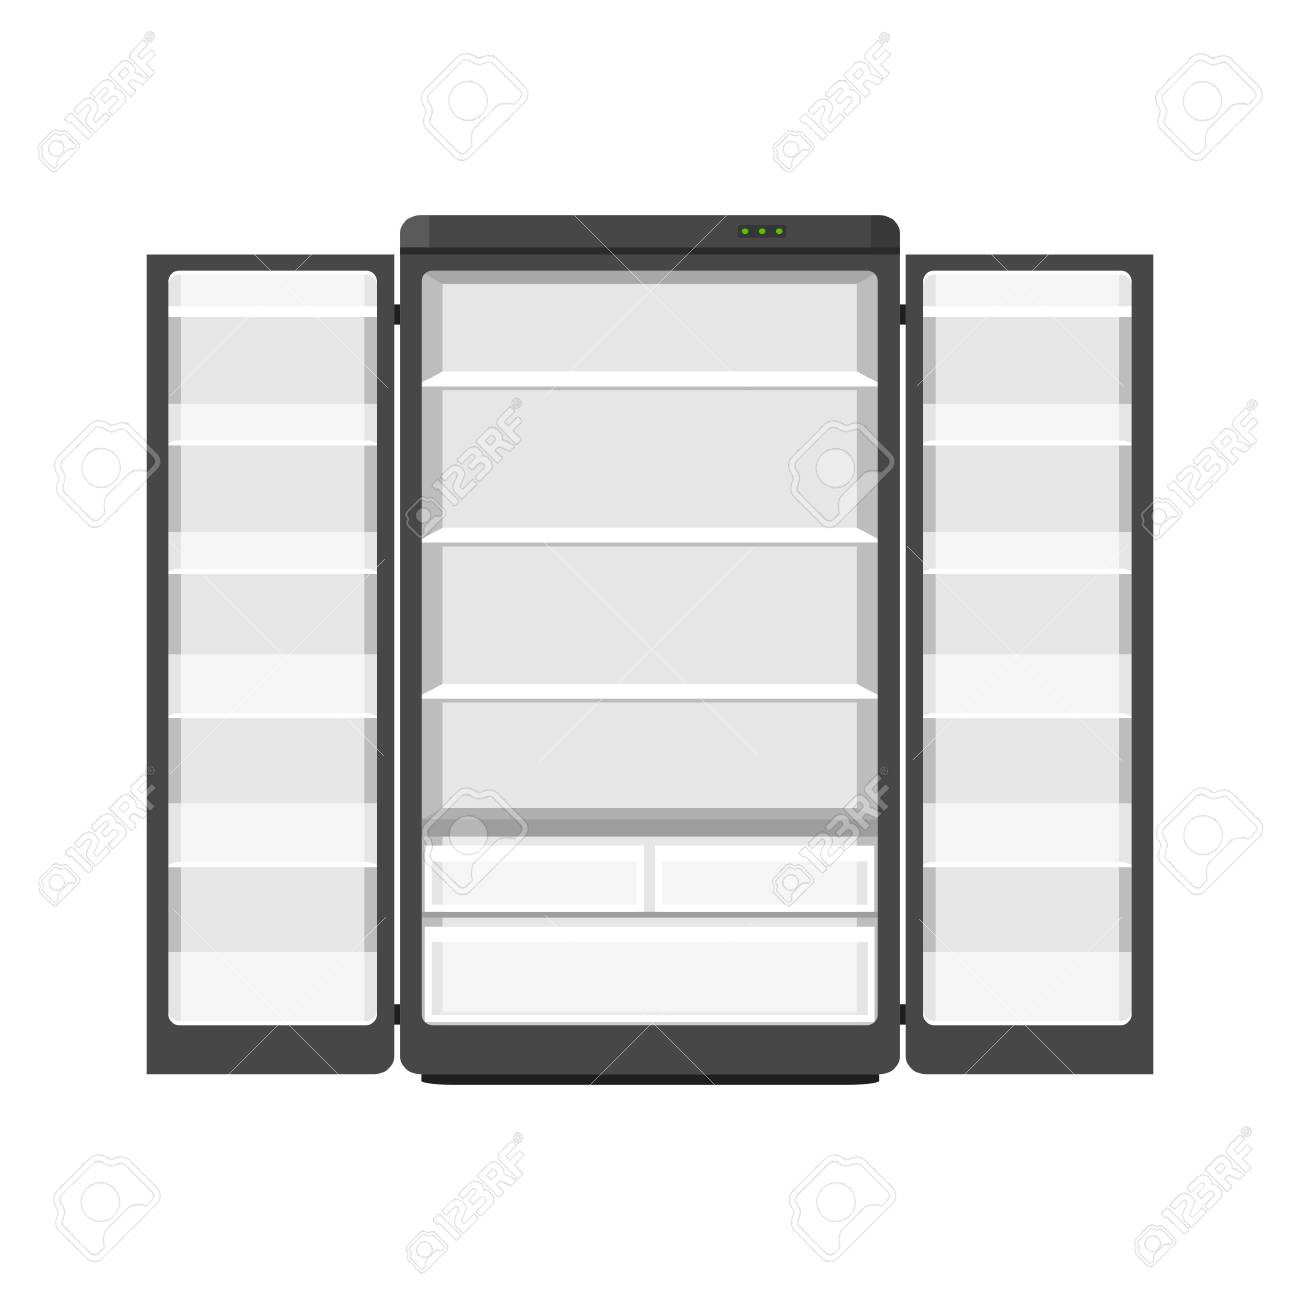 Black Modern Household Appliances Fridge With Two Doors Isolated